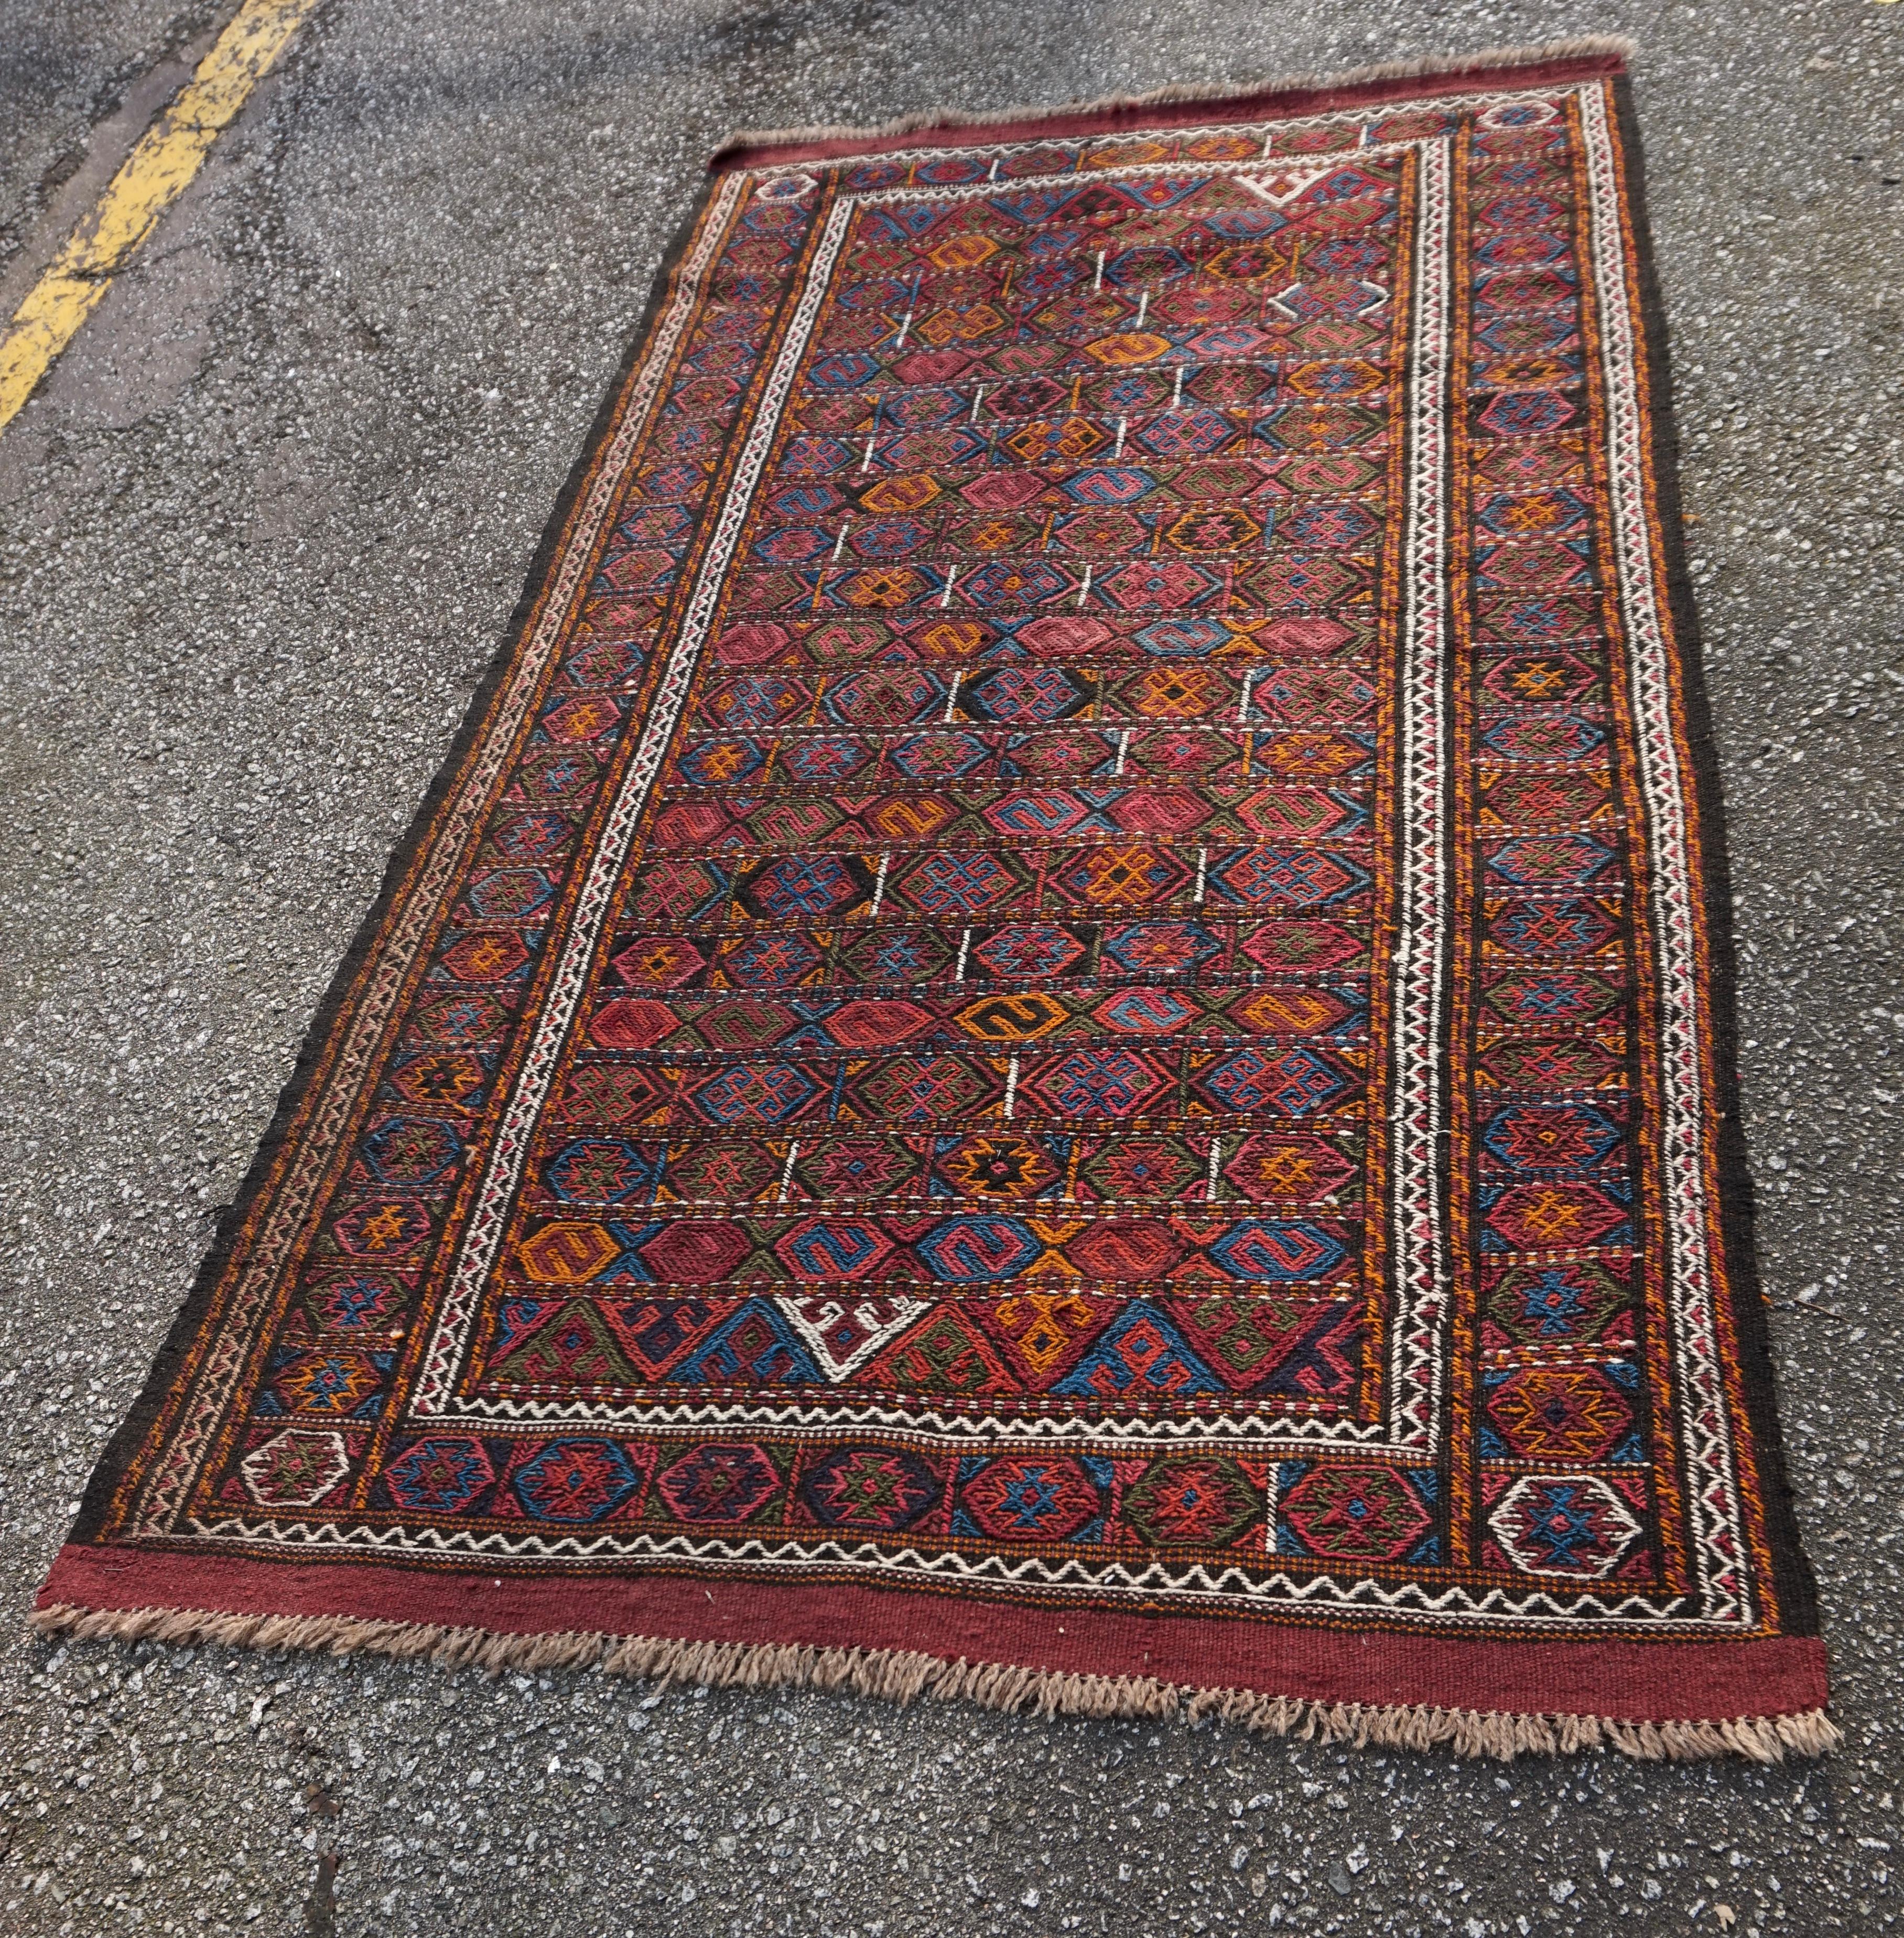 Rare Central Asian nomadic tribal kilim with exquisite flat-weave. A refined medley of warm, yet subdued hues define this rustic piece. Some minor repair present but overall in very good condition.